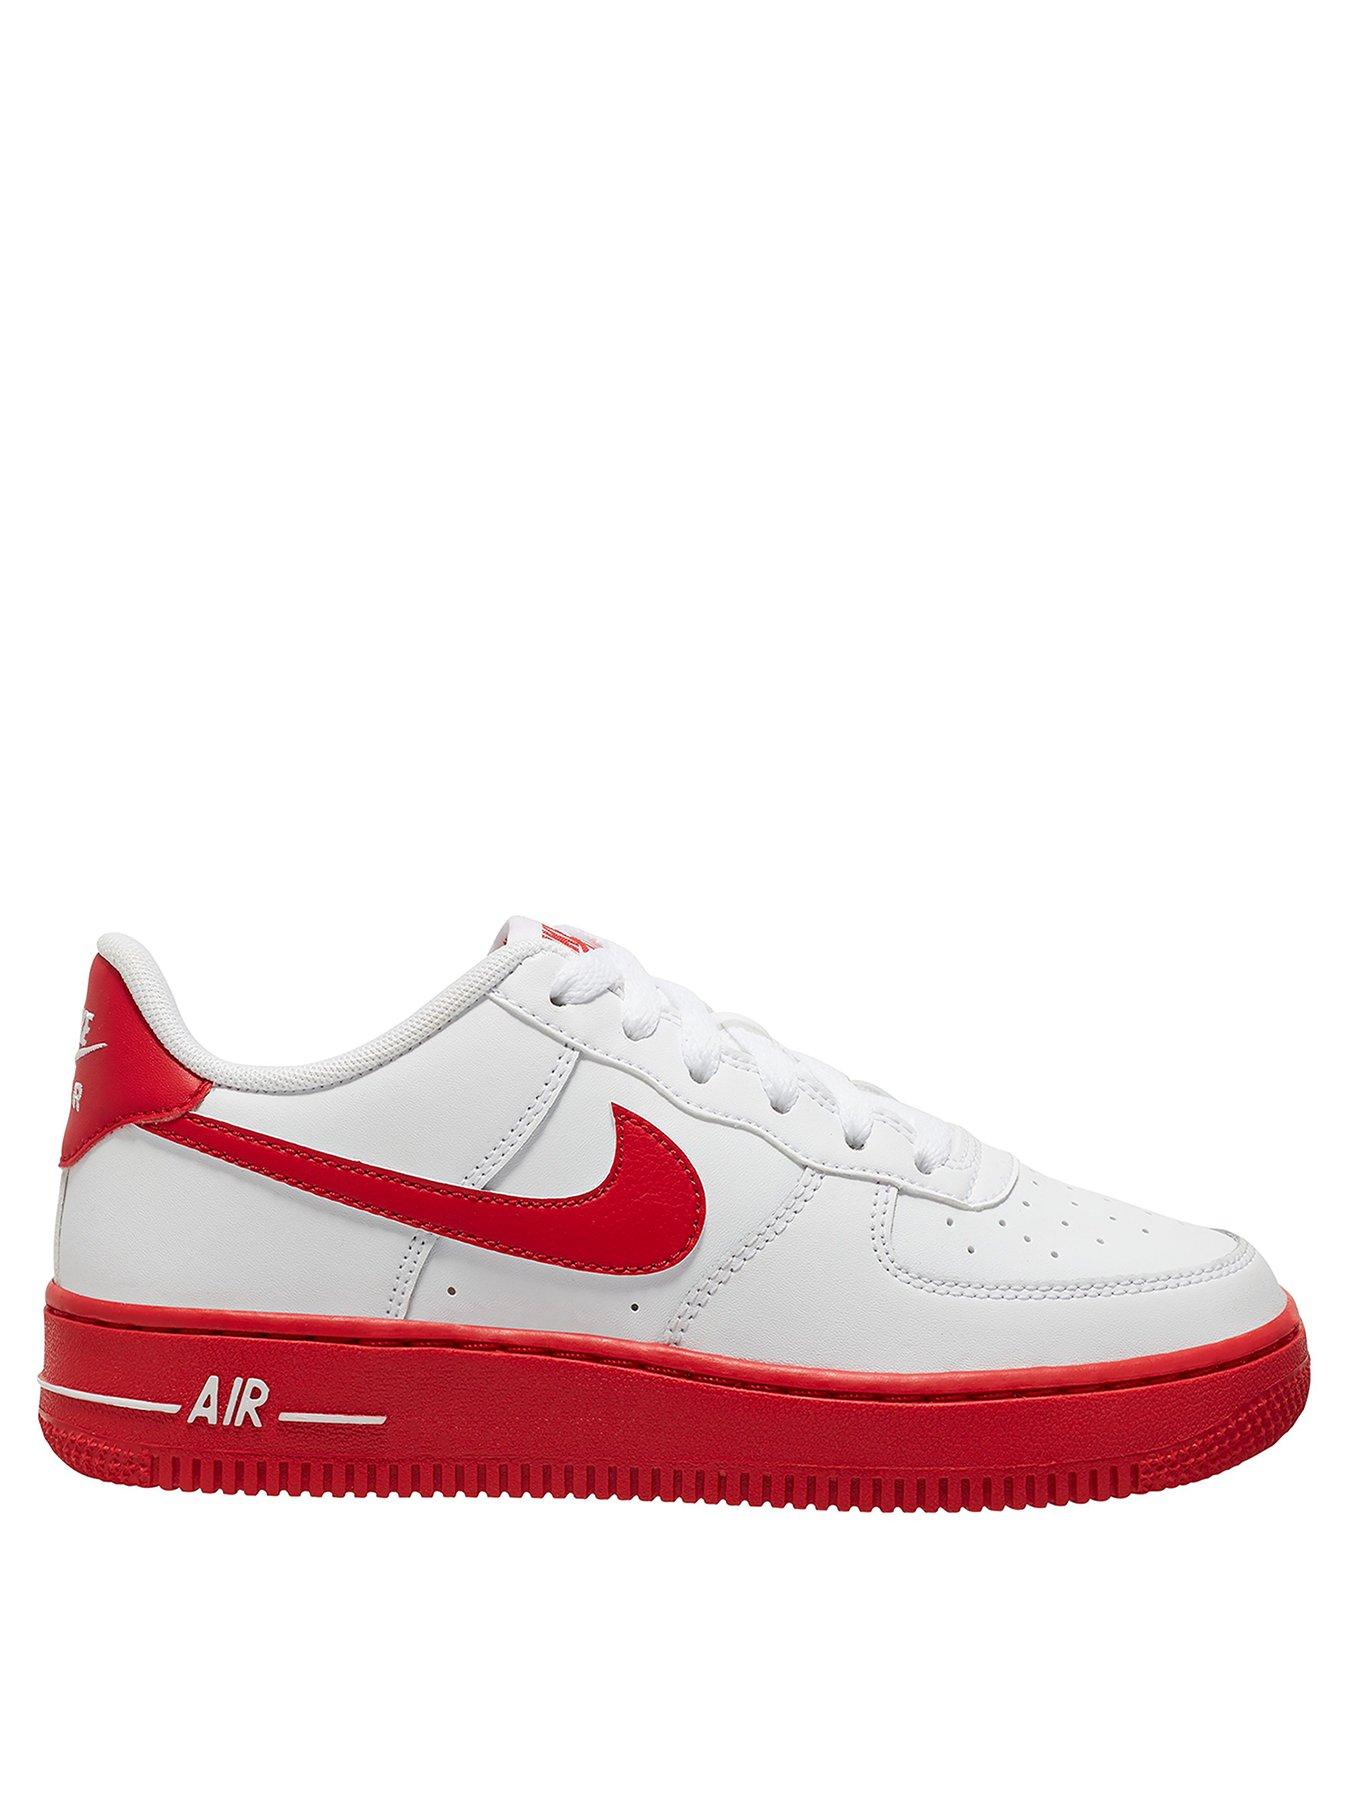 nike air force 1 white junior size 5.5